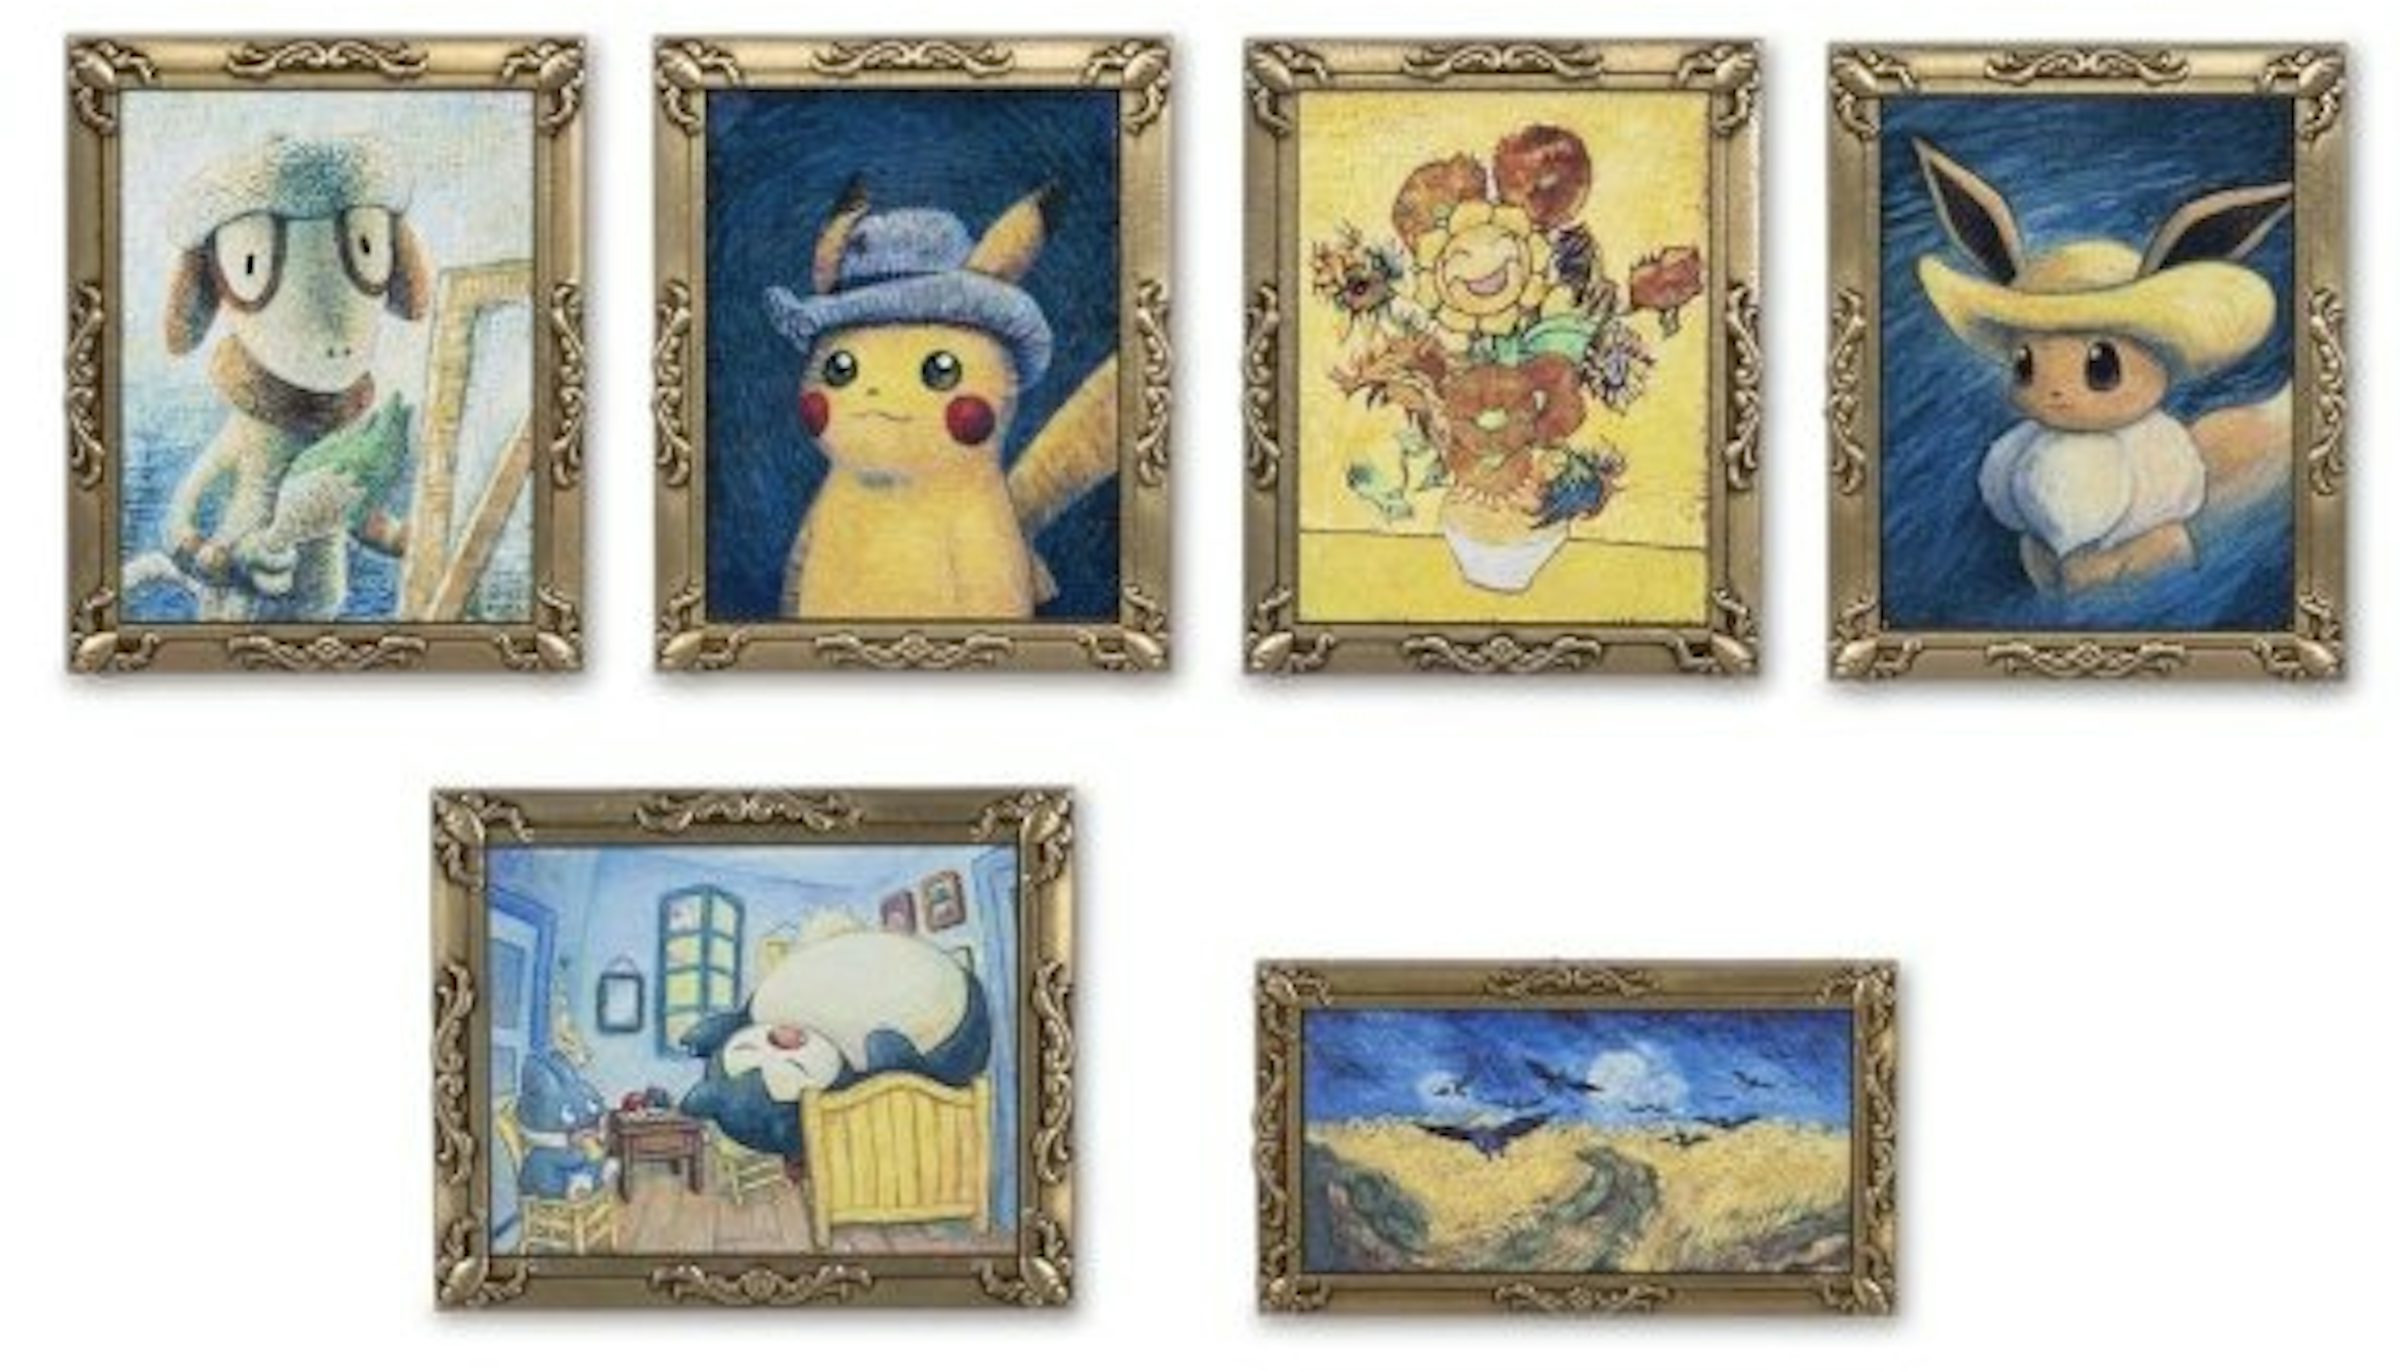 https://images.stockx.com/images/Pokemon-Center-x-Van-Gogh-Museum-Pokemon-Inspired-by-Paintings-6-Pack-Pin-Box-Set.jpg?fit=fill&bg=FFFFFF&w=1200&h=857&fm=jpg&auto=compress&dpr=2&trim=color&updated_at=1696273757&q=60